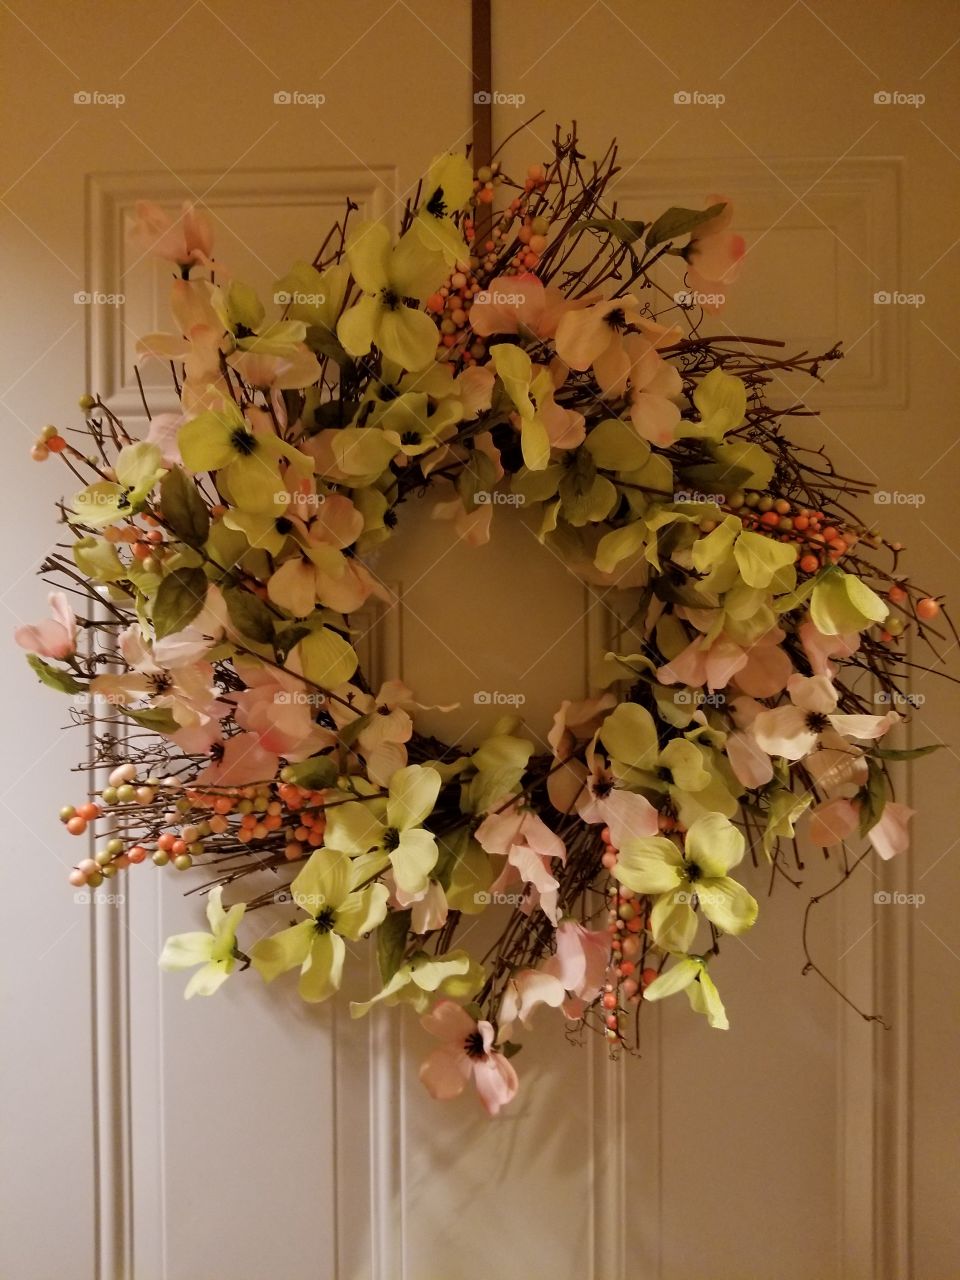 welcome wreath